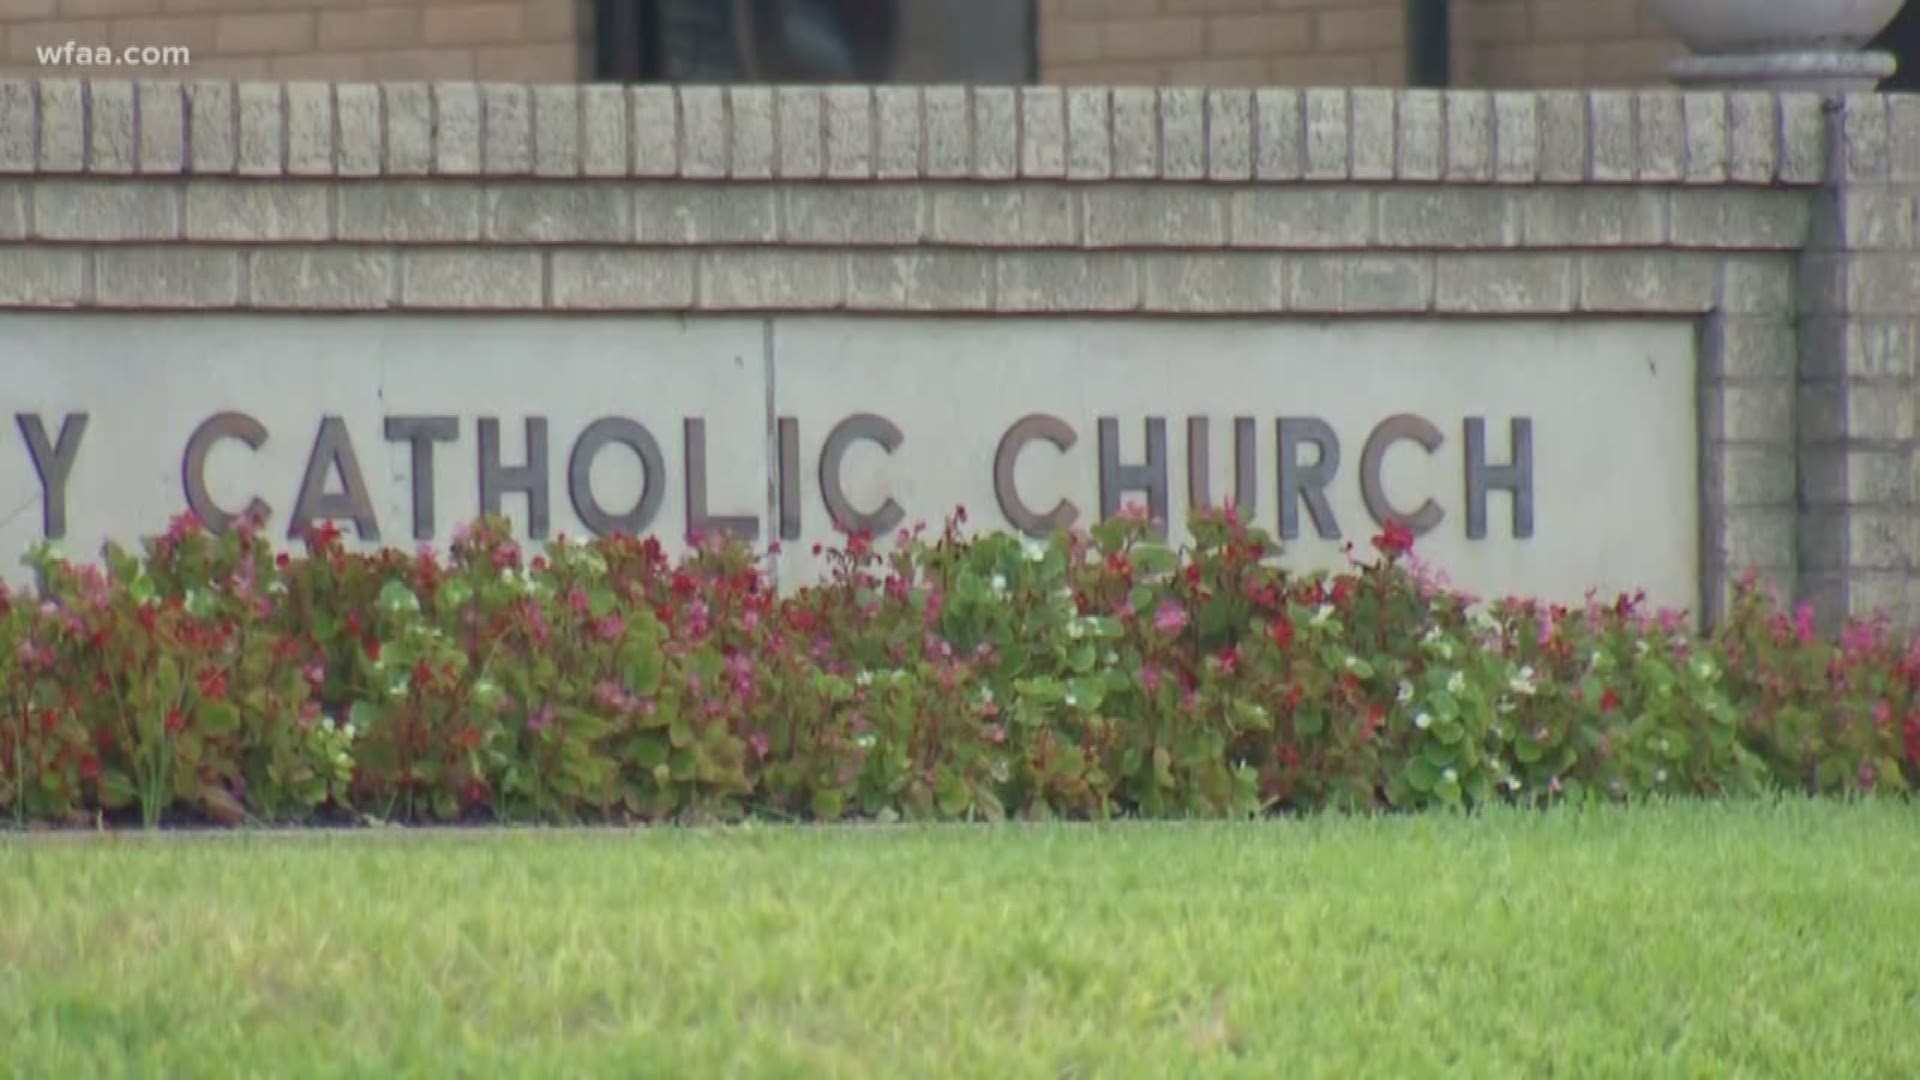 The Church now calls law enforcement anytime abuse is alleged, according to Bishop Edward Burns.